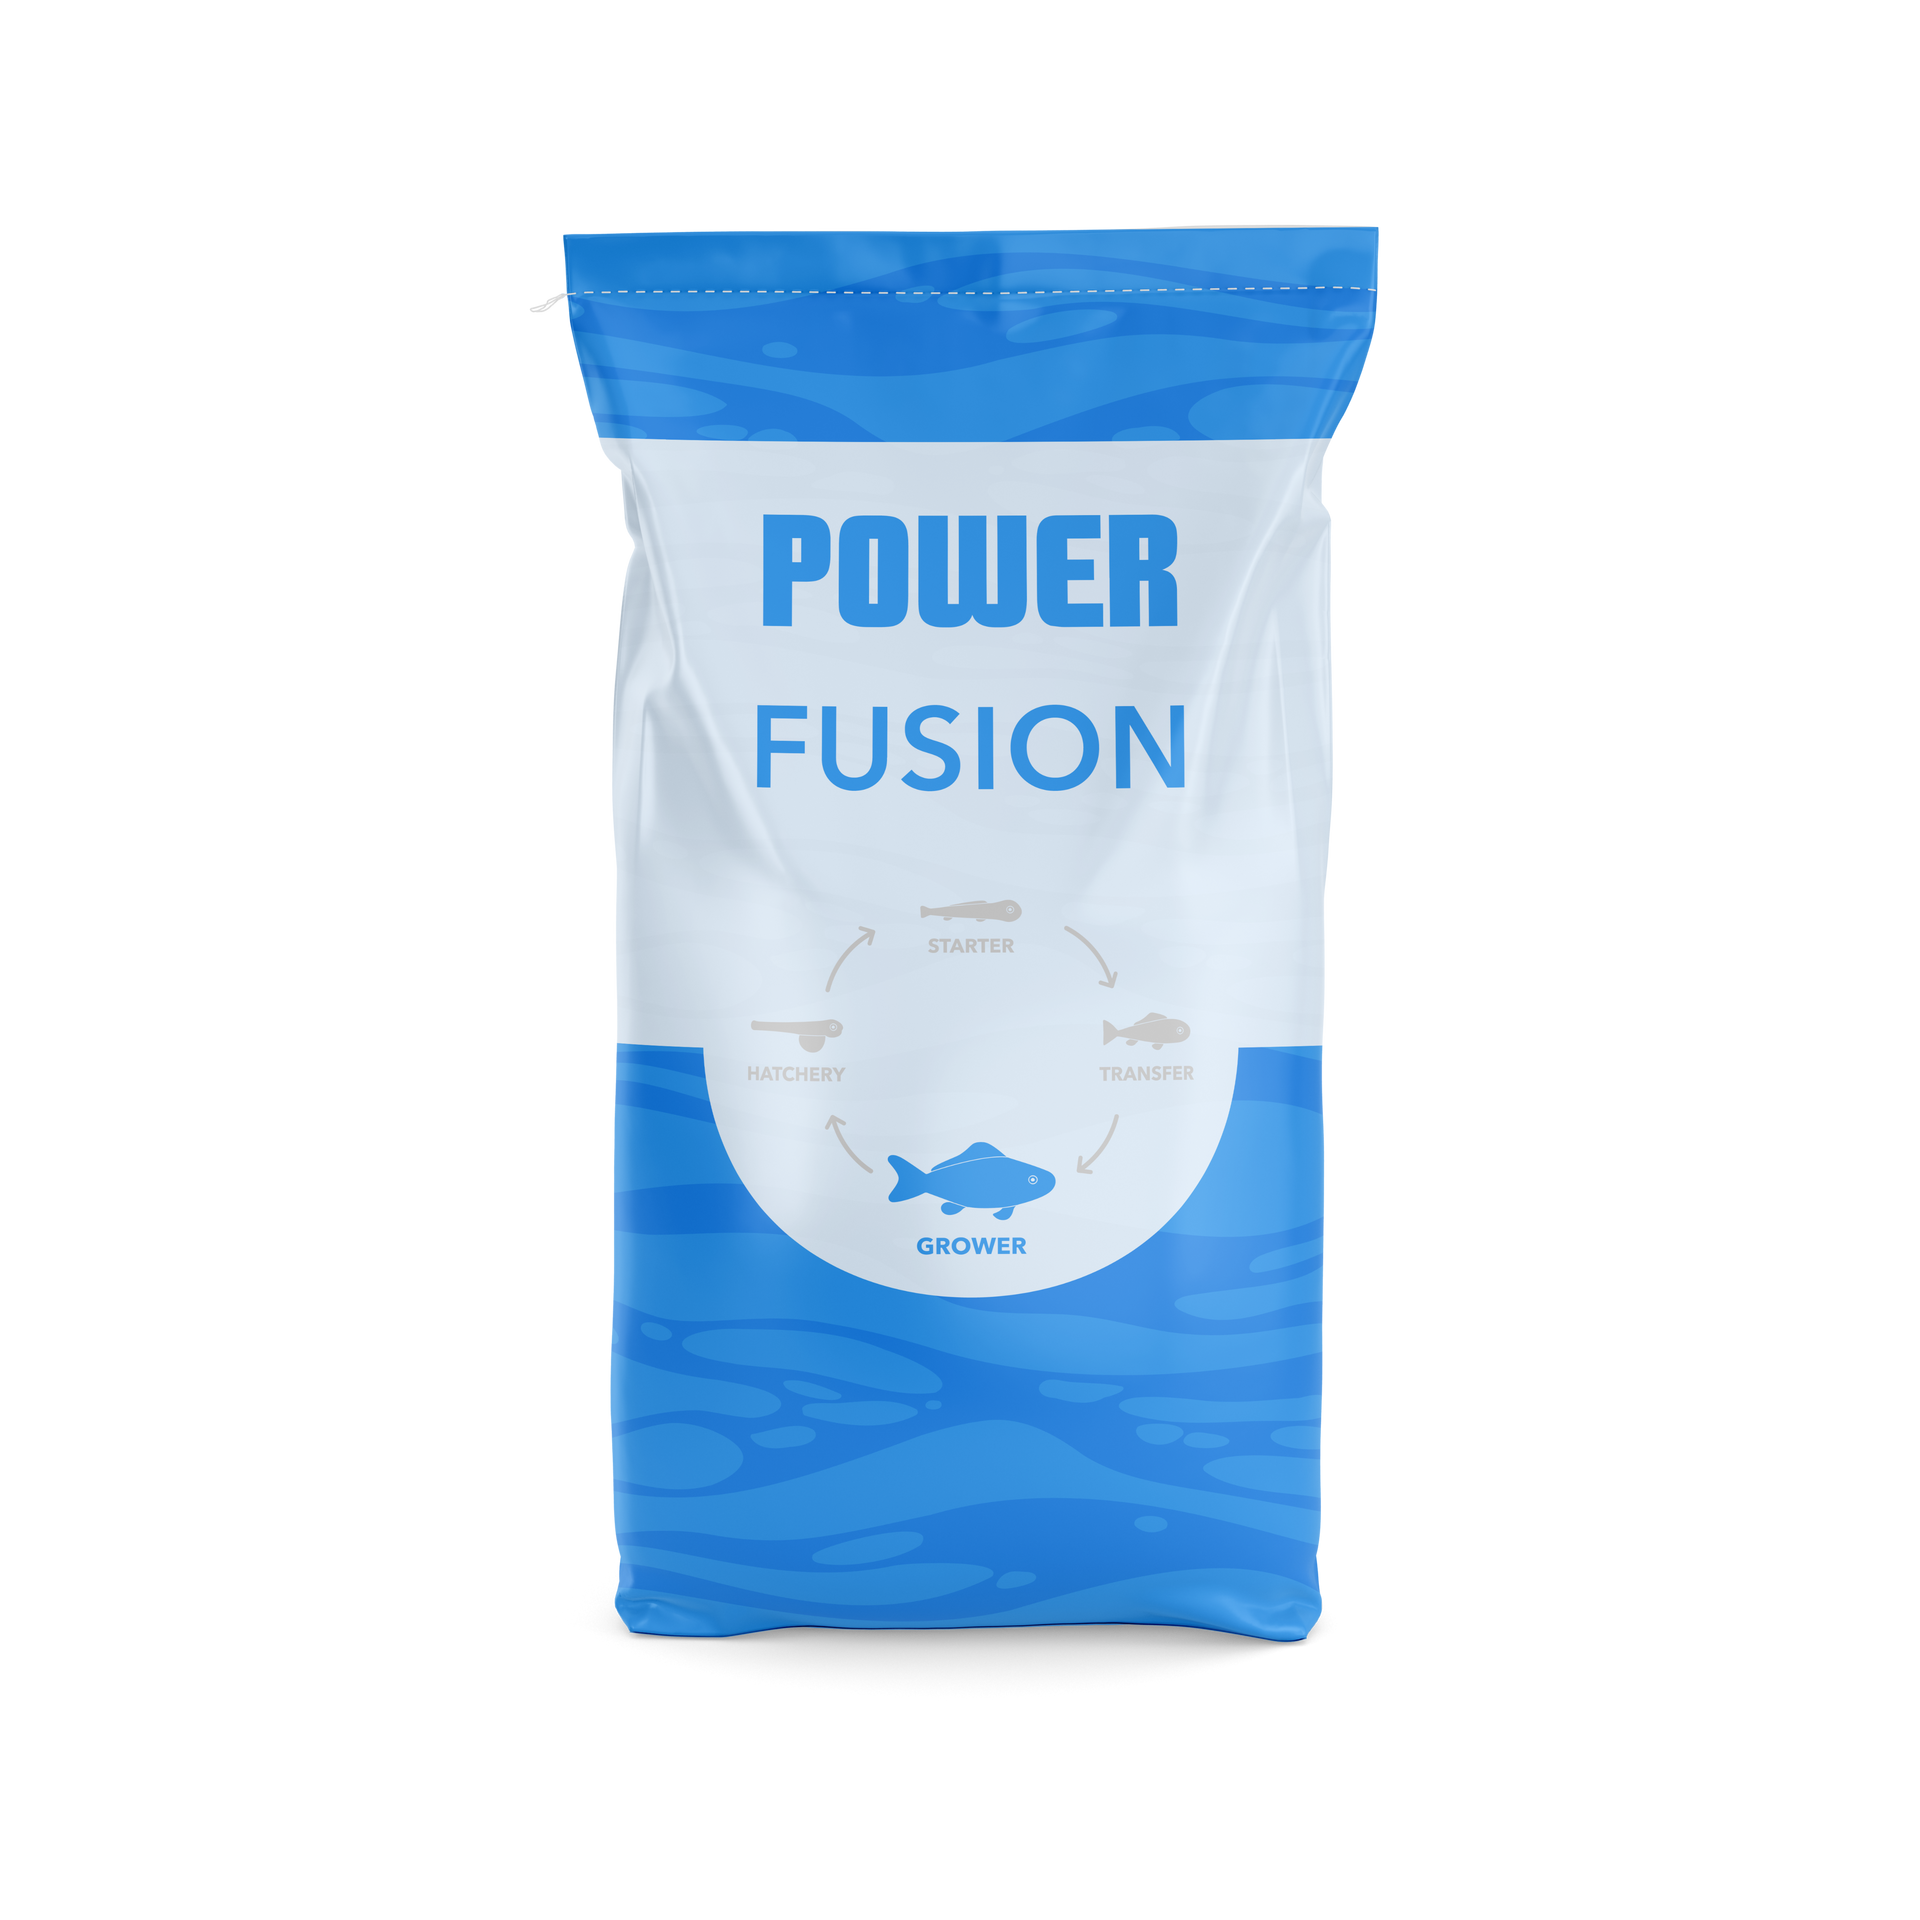 Power Fusion feed for atlantic salmon in Chile